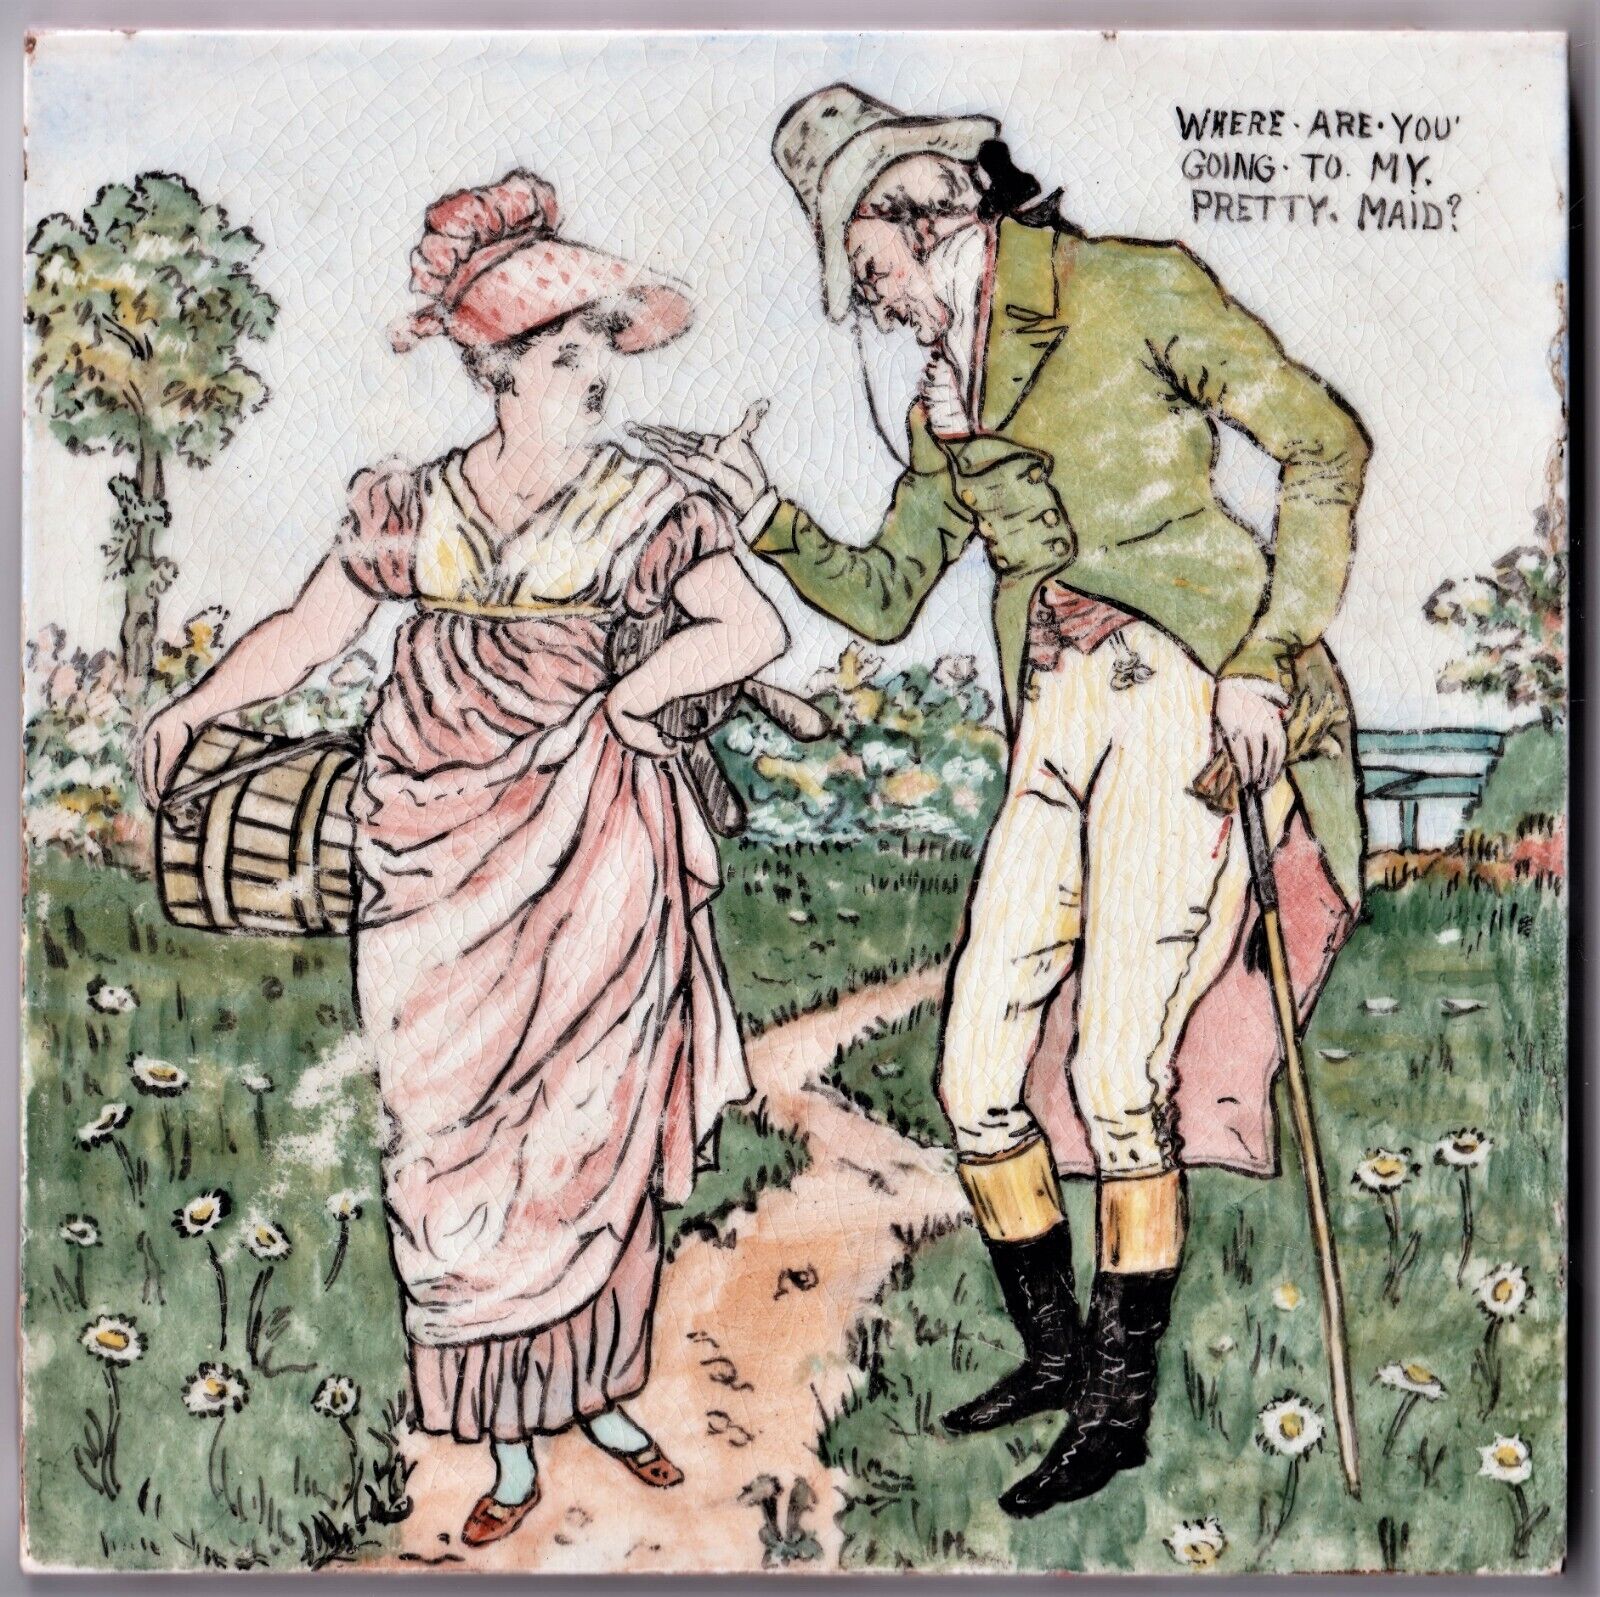 Antique Valuations: OVERGLAZE HAND PAINTED WALTER CRANE WHERE ARE YOU GOING MY PRETTY MAID?